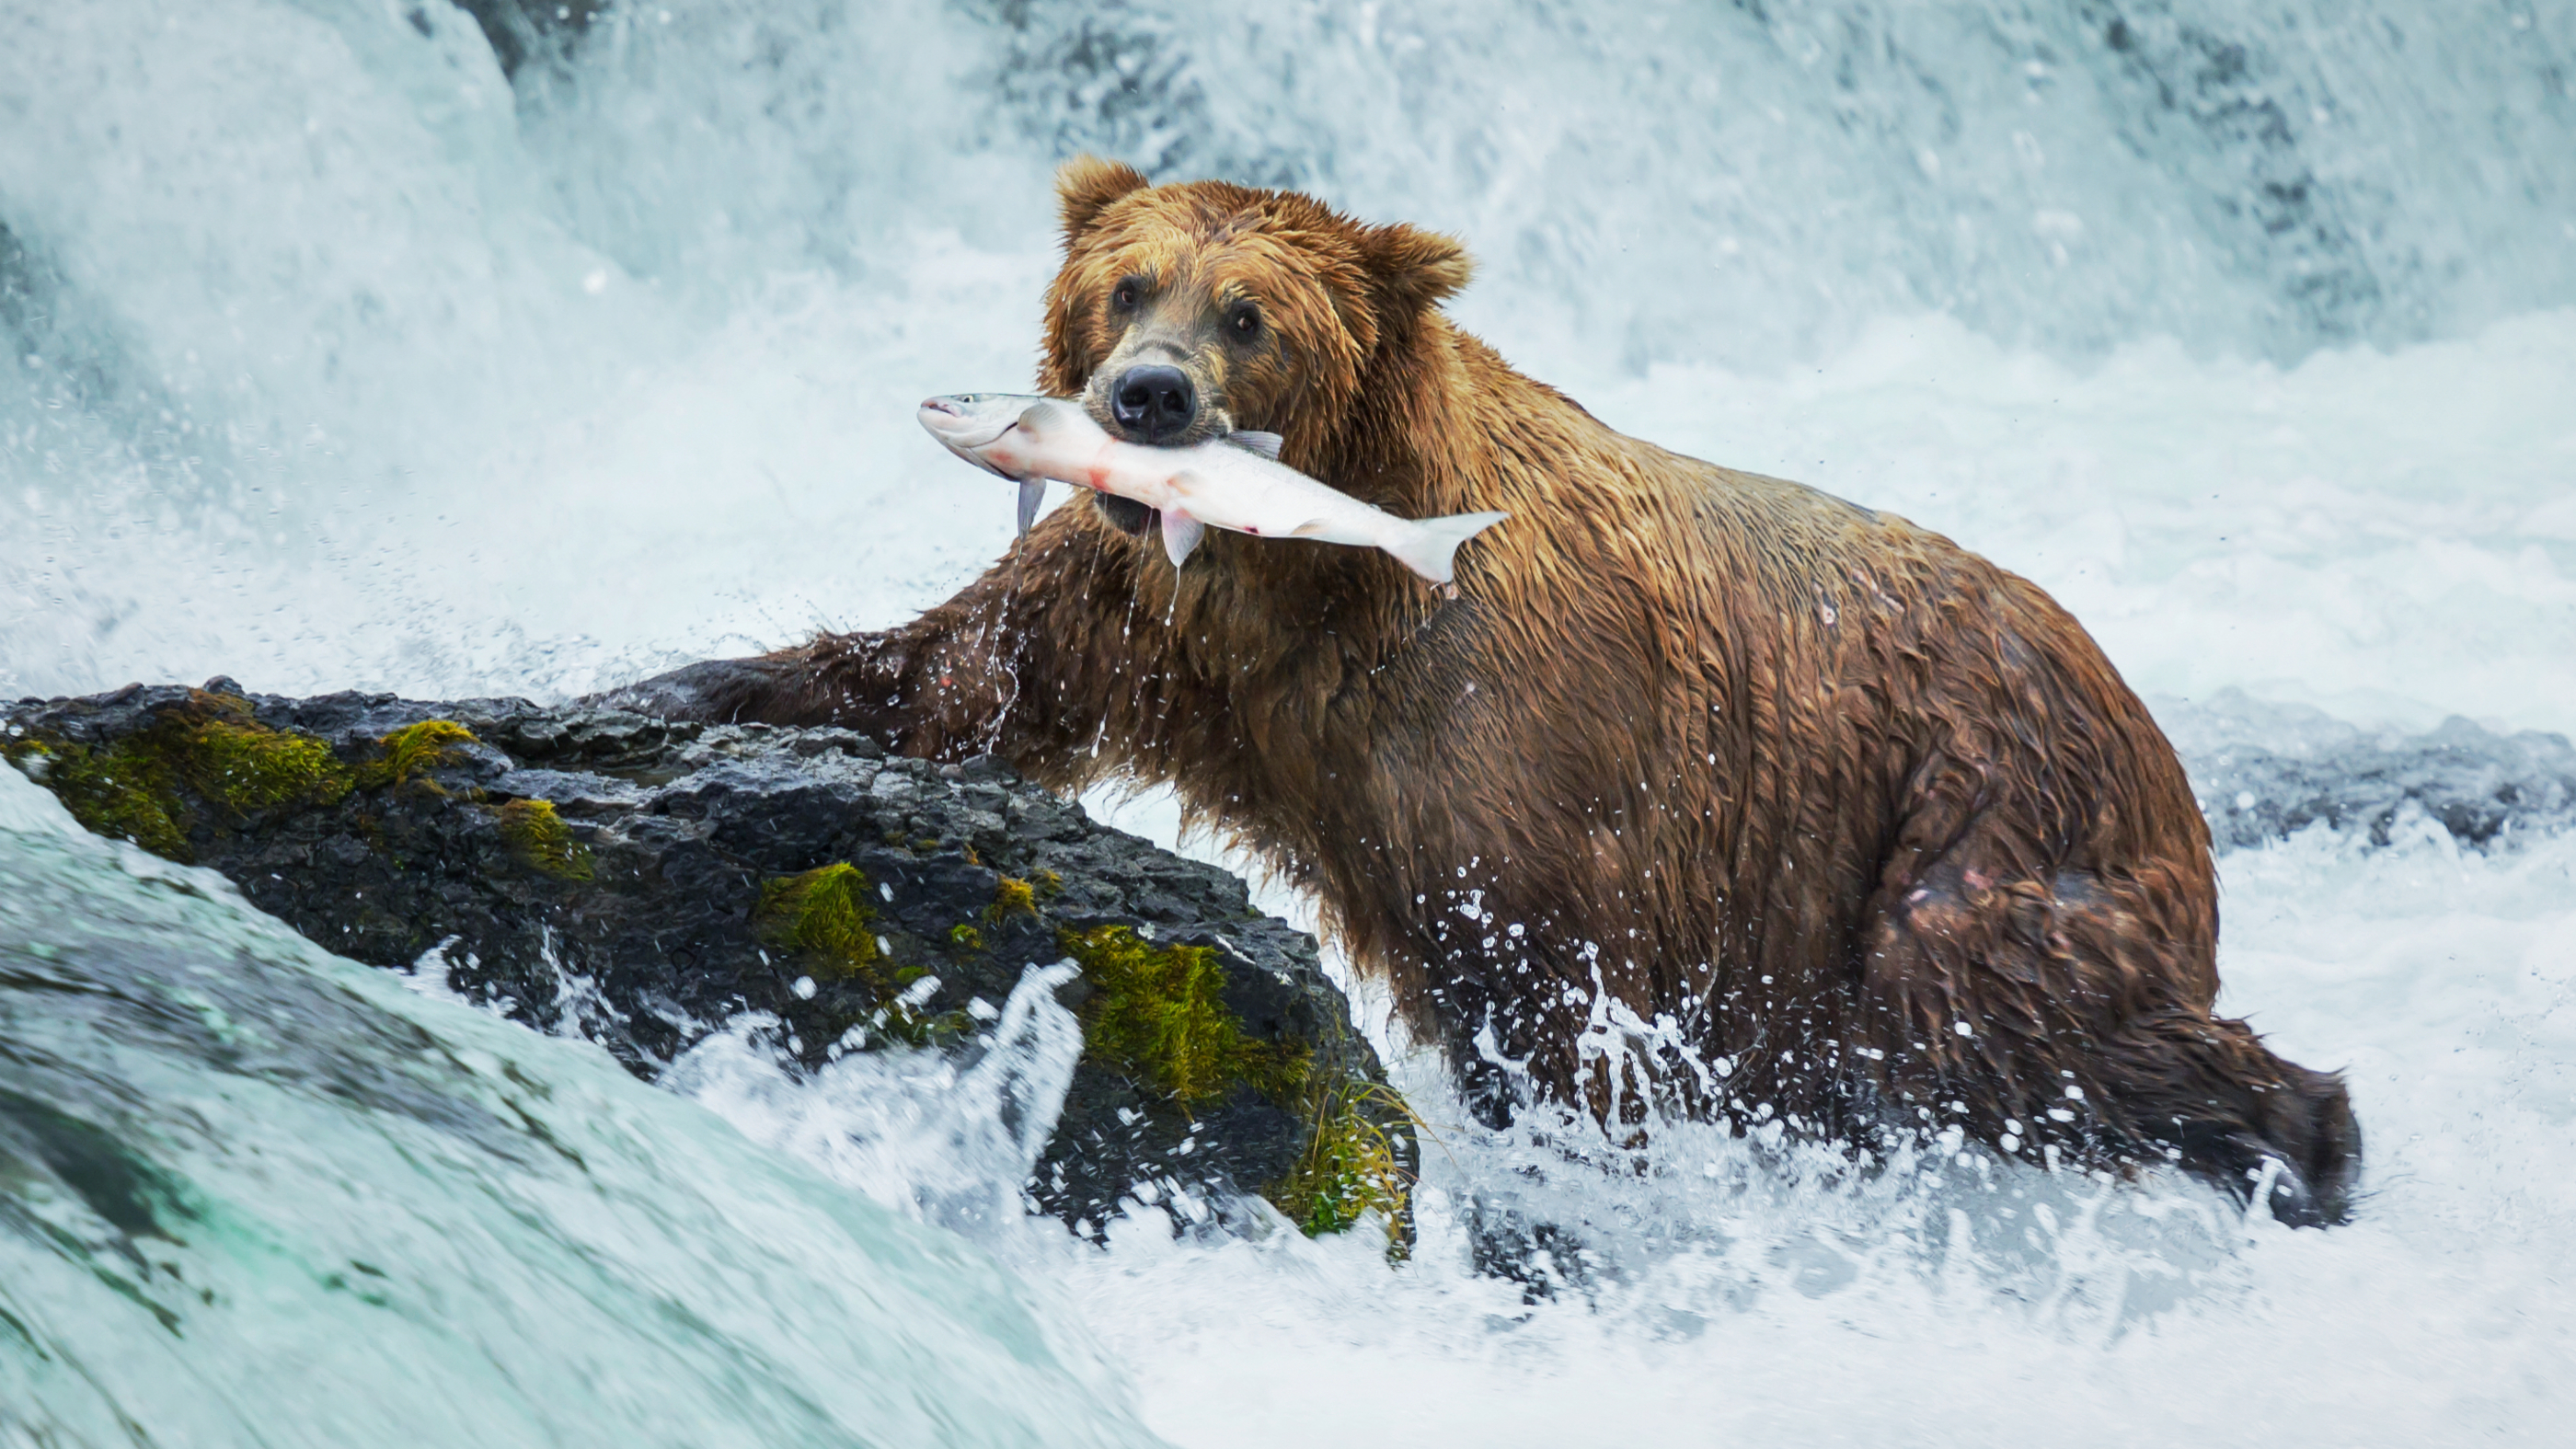 Get Your Feet Wet in a Brooks Falls Bearcam Chat! Explore